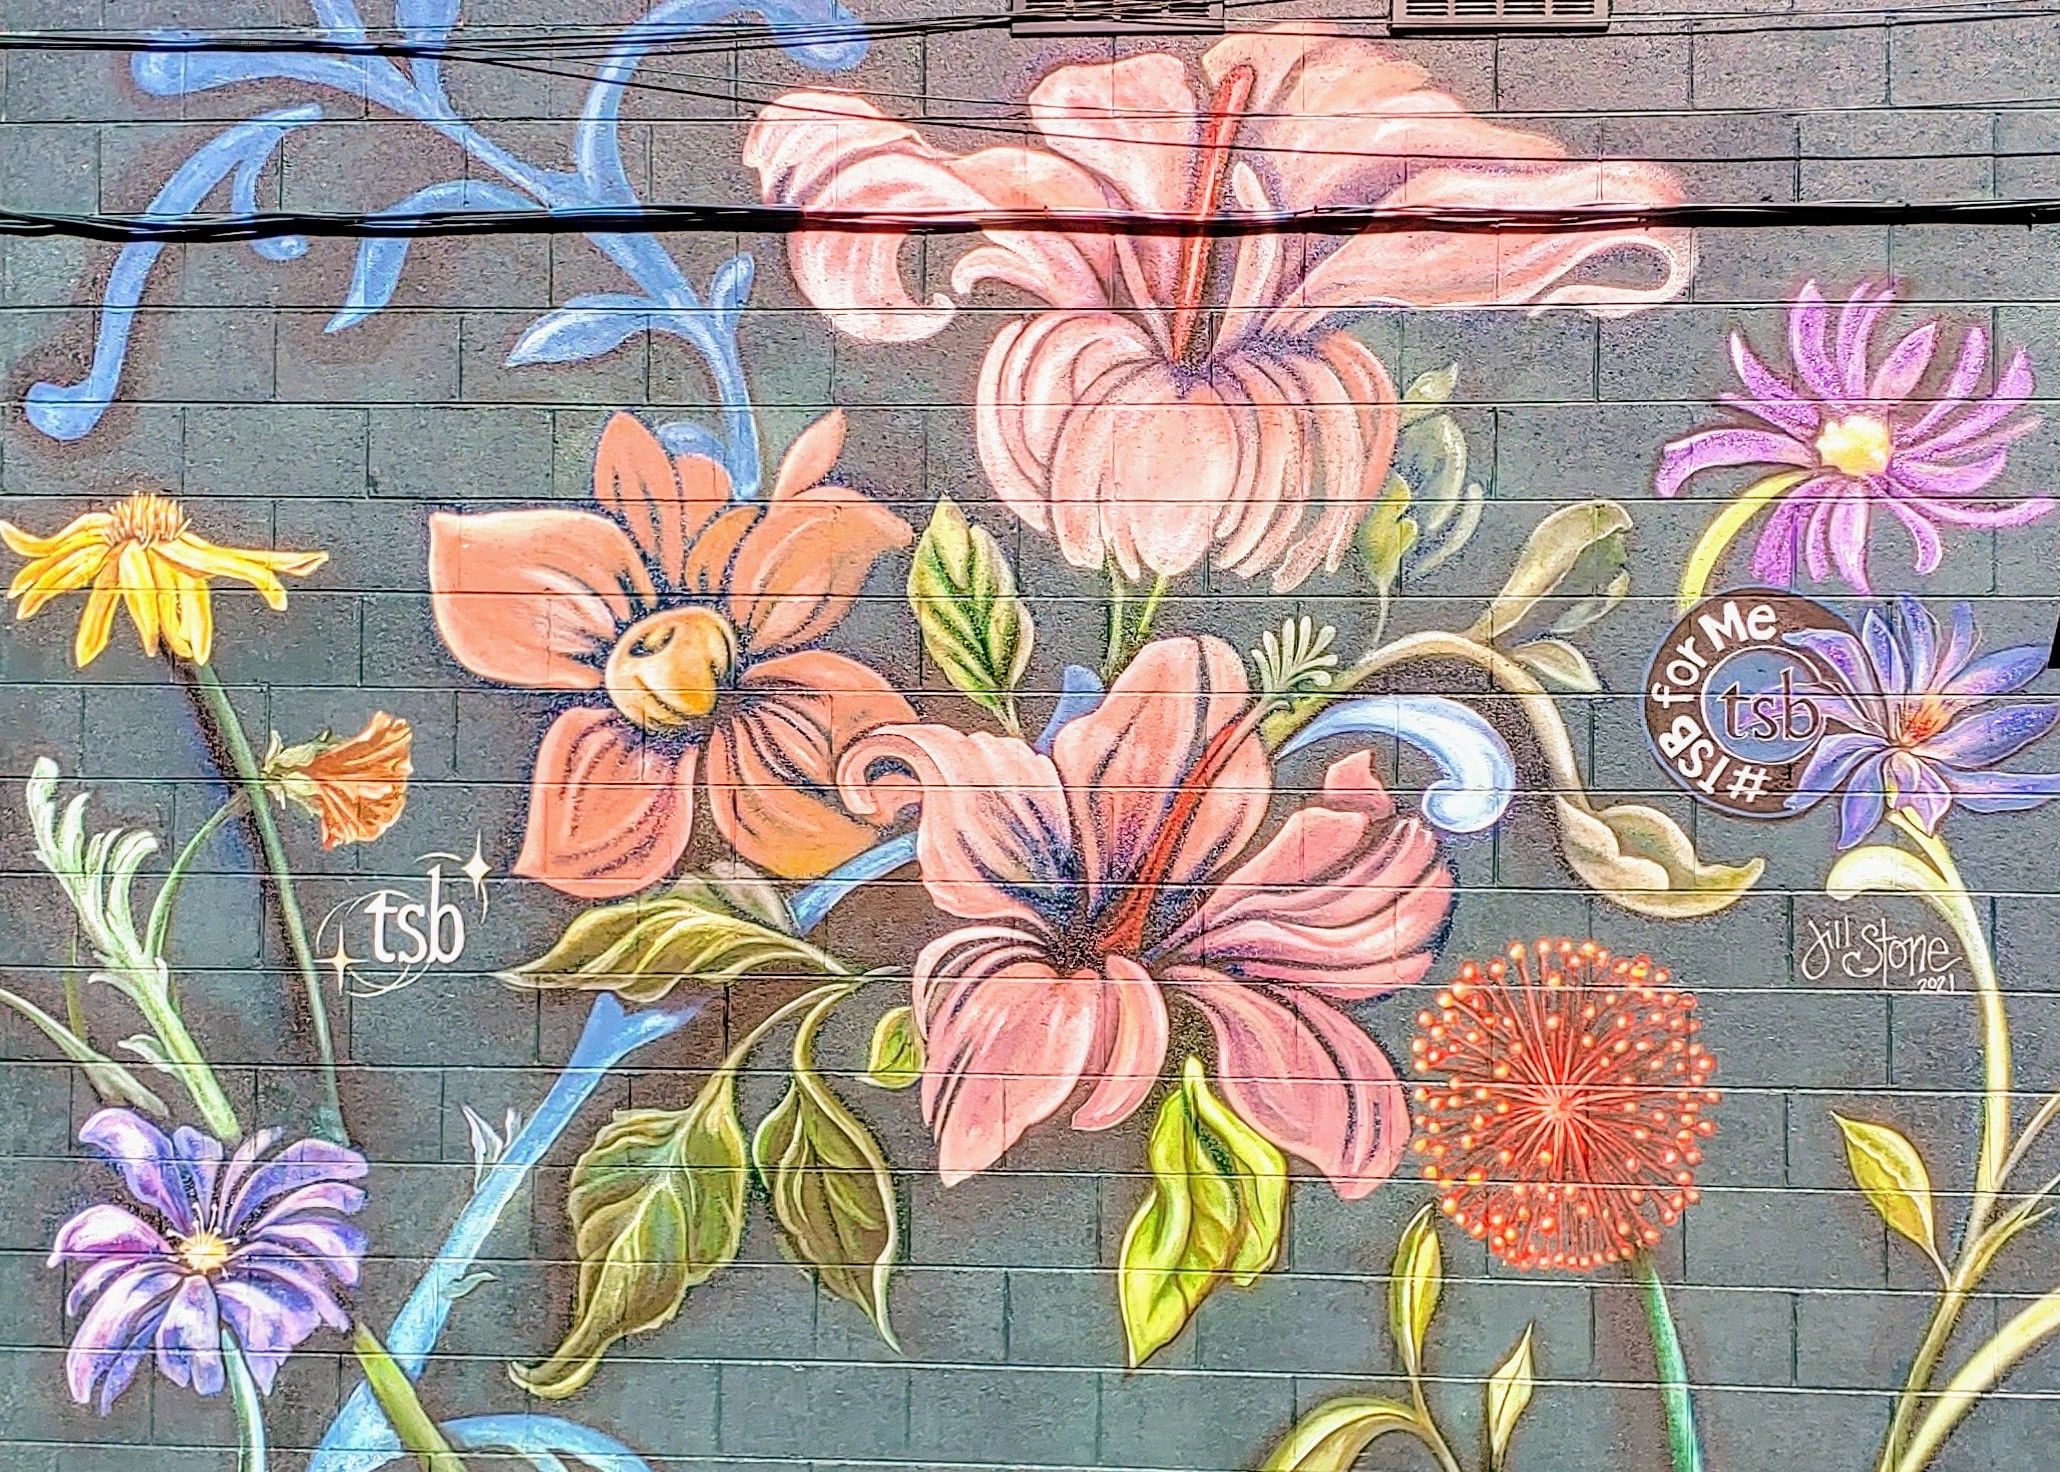 30' Outdoor Flower Mural at Tennessee School of Beauty.